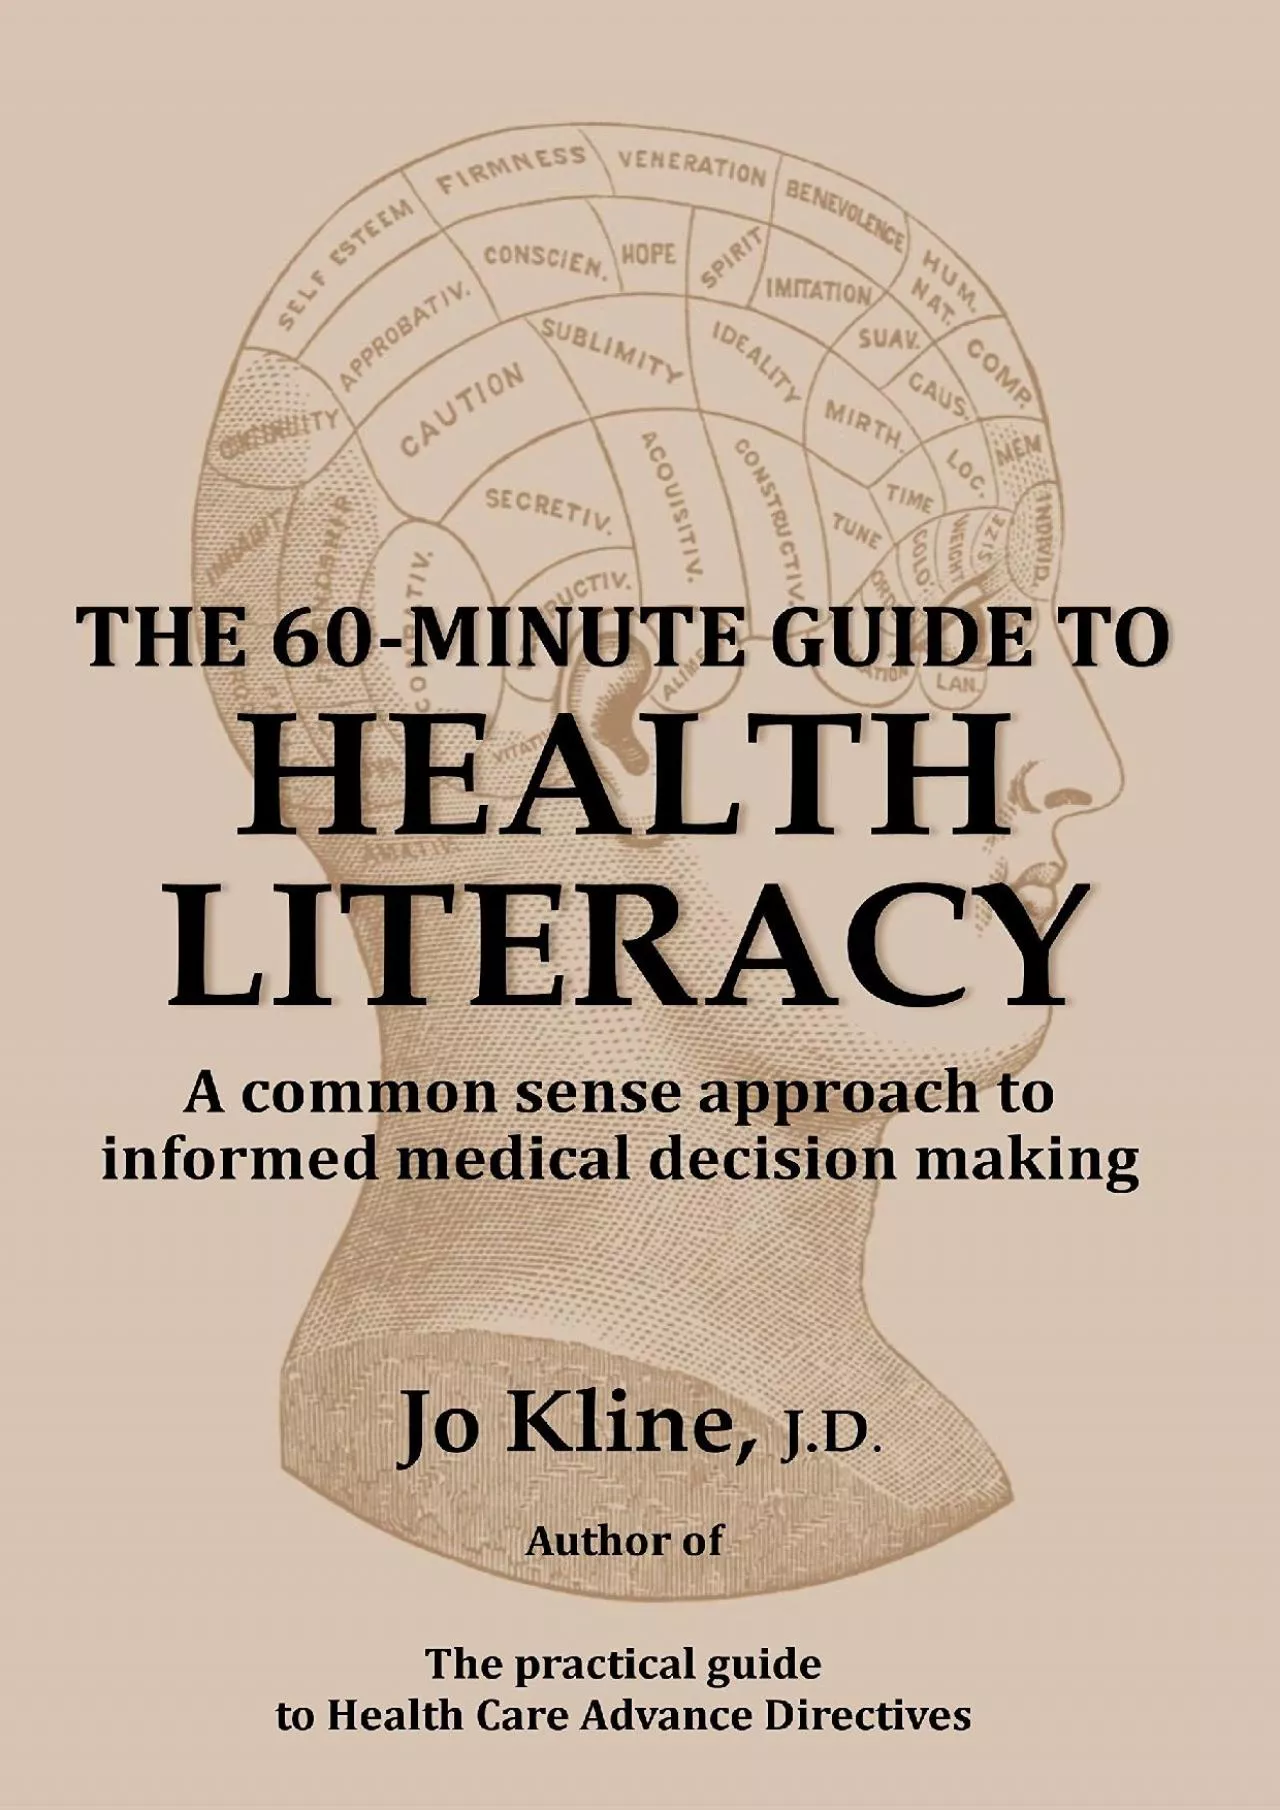 (BOOK)-THE 60-MINUTE GUIDE TO HEALTH LITERACY: A common sense approach to informed medical